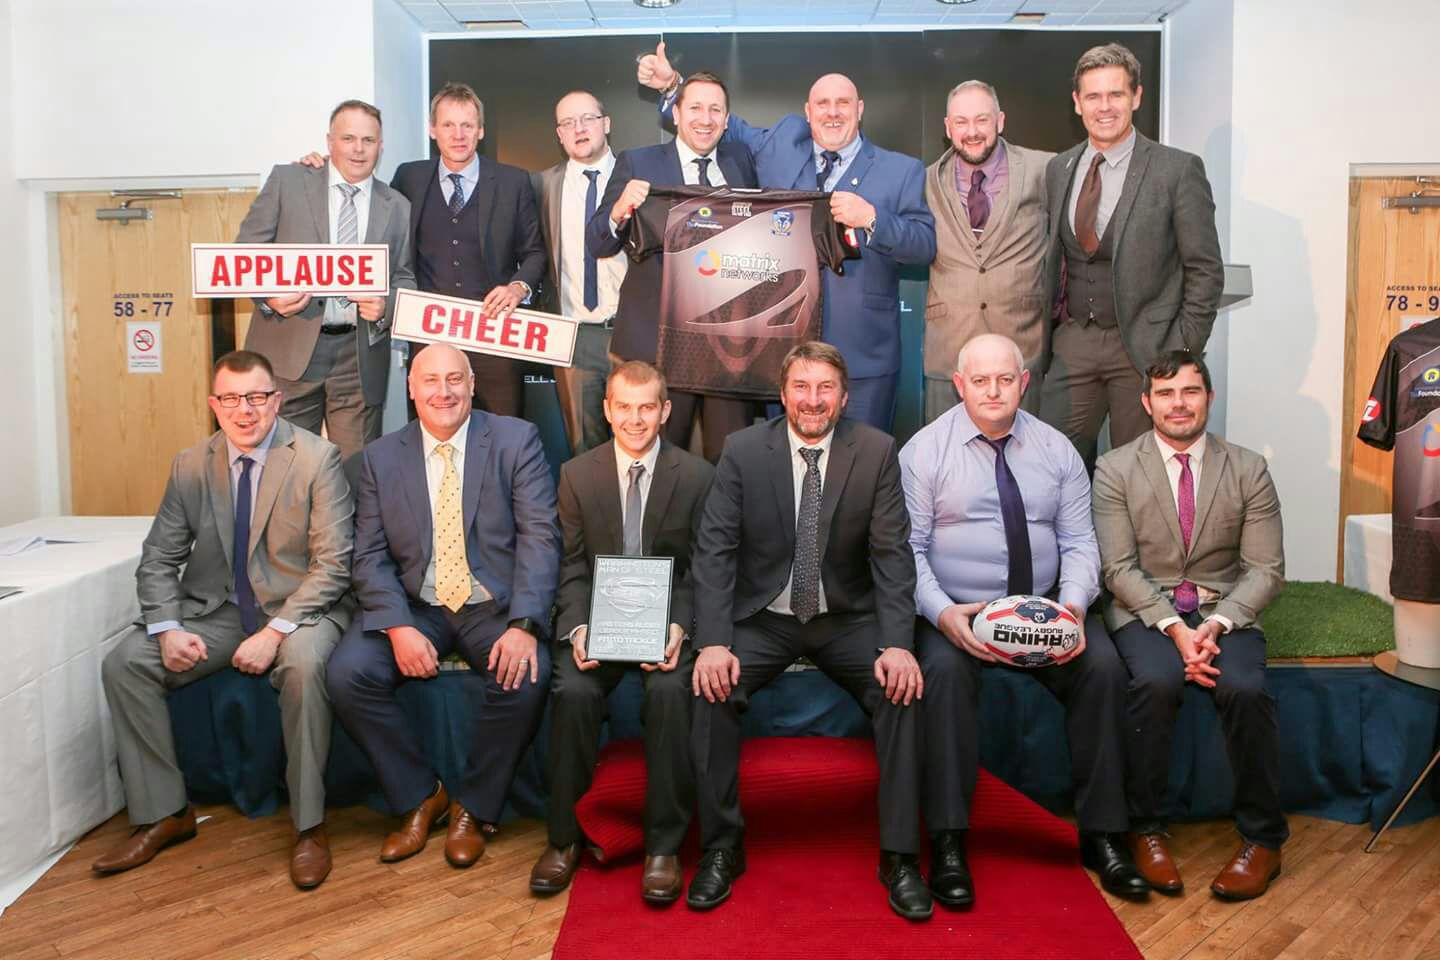 Touch rugby team picks up award after losing 40st in first year - Warrington Guardian